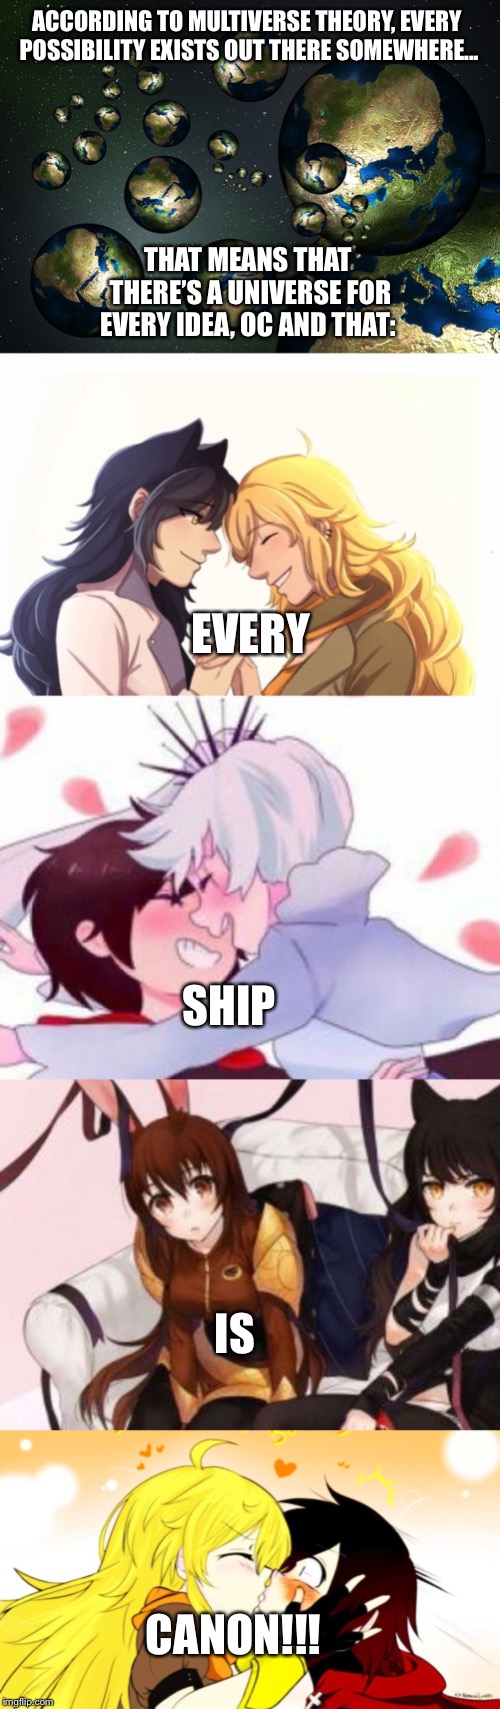 All Your Worst Nightmares | ACCORDING TO MULTIVERSE THEORY,
EVERY POSSIBILITY EXISTS OUT THERE SOMEWHERE... THAT MEANS THAT THERE’S A UNIVERSE FOR EVERY IDEA, OC AND THAT:; EVERY; SHIP; IS; CANON!!! | image tagged in multiverse,nightmares,funny,memes,rwby,ships | made w/ Imgflip meme maker